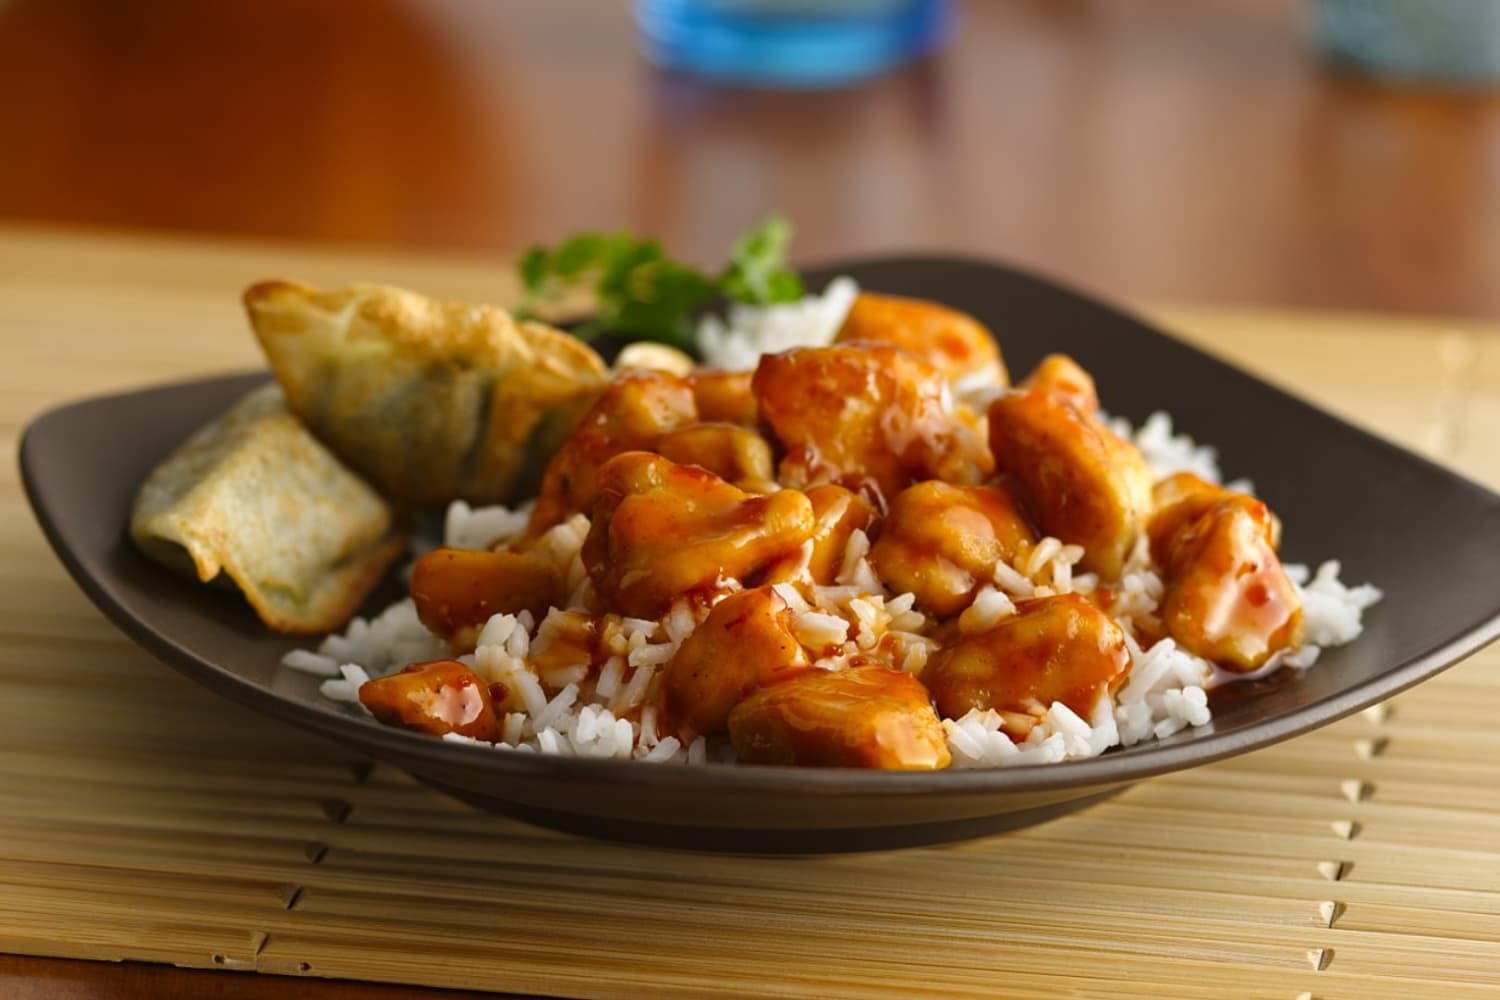 A square black plate with rice, dumplings and orange chicken